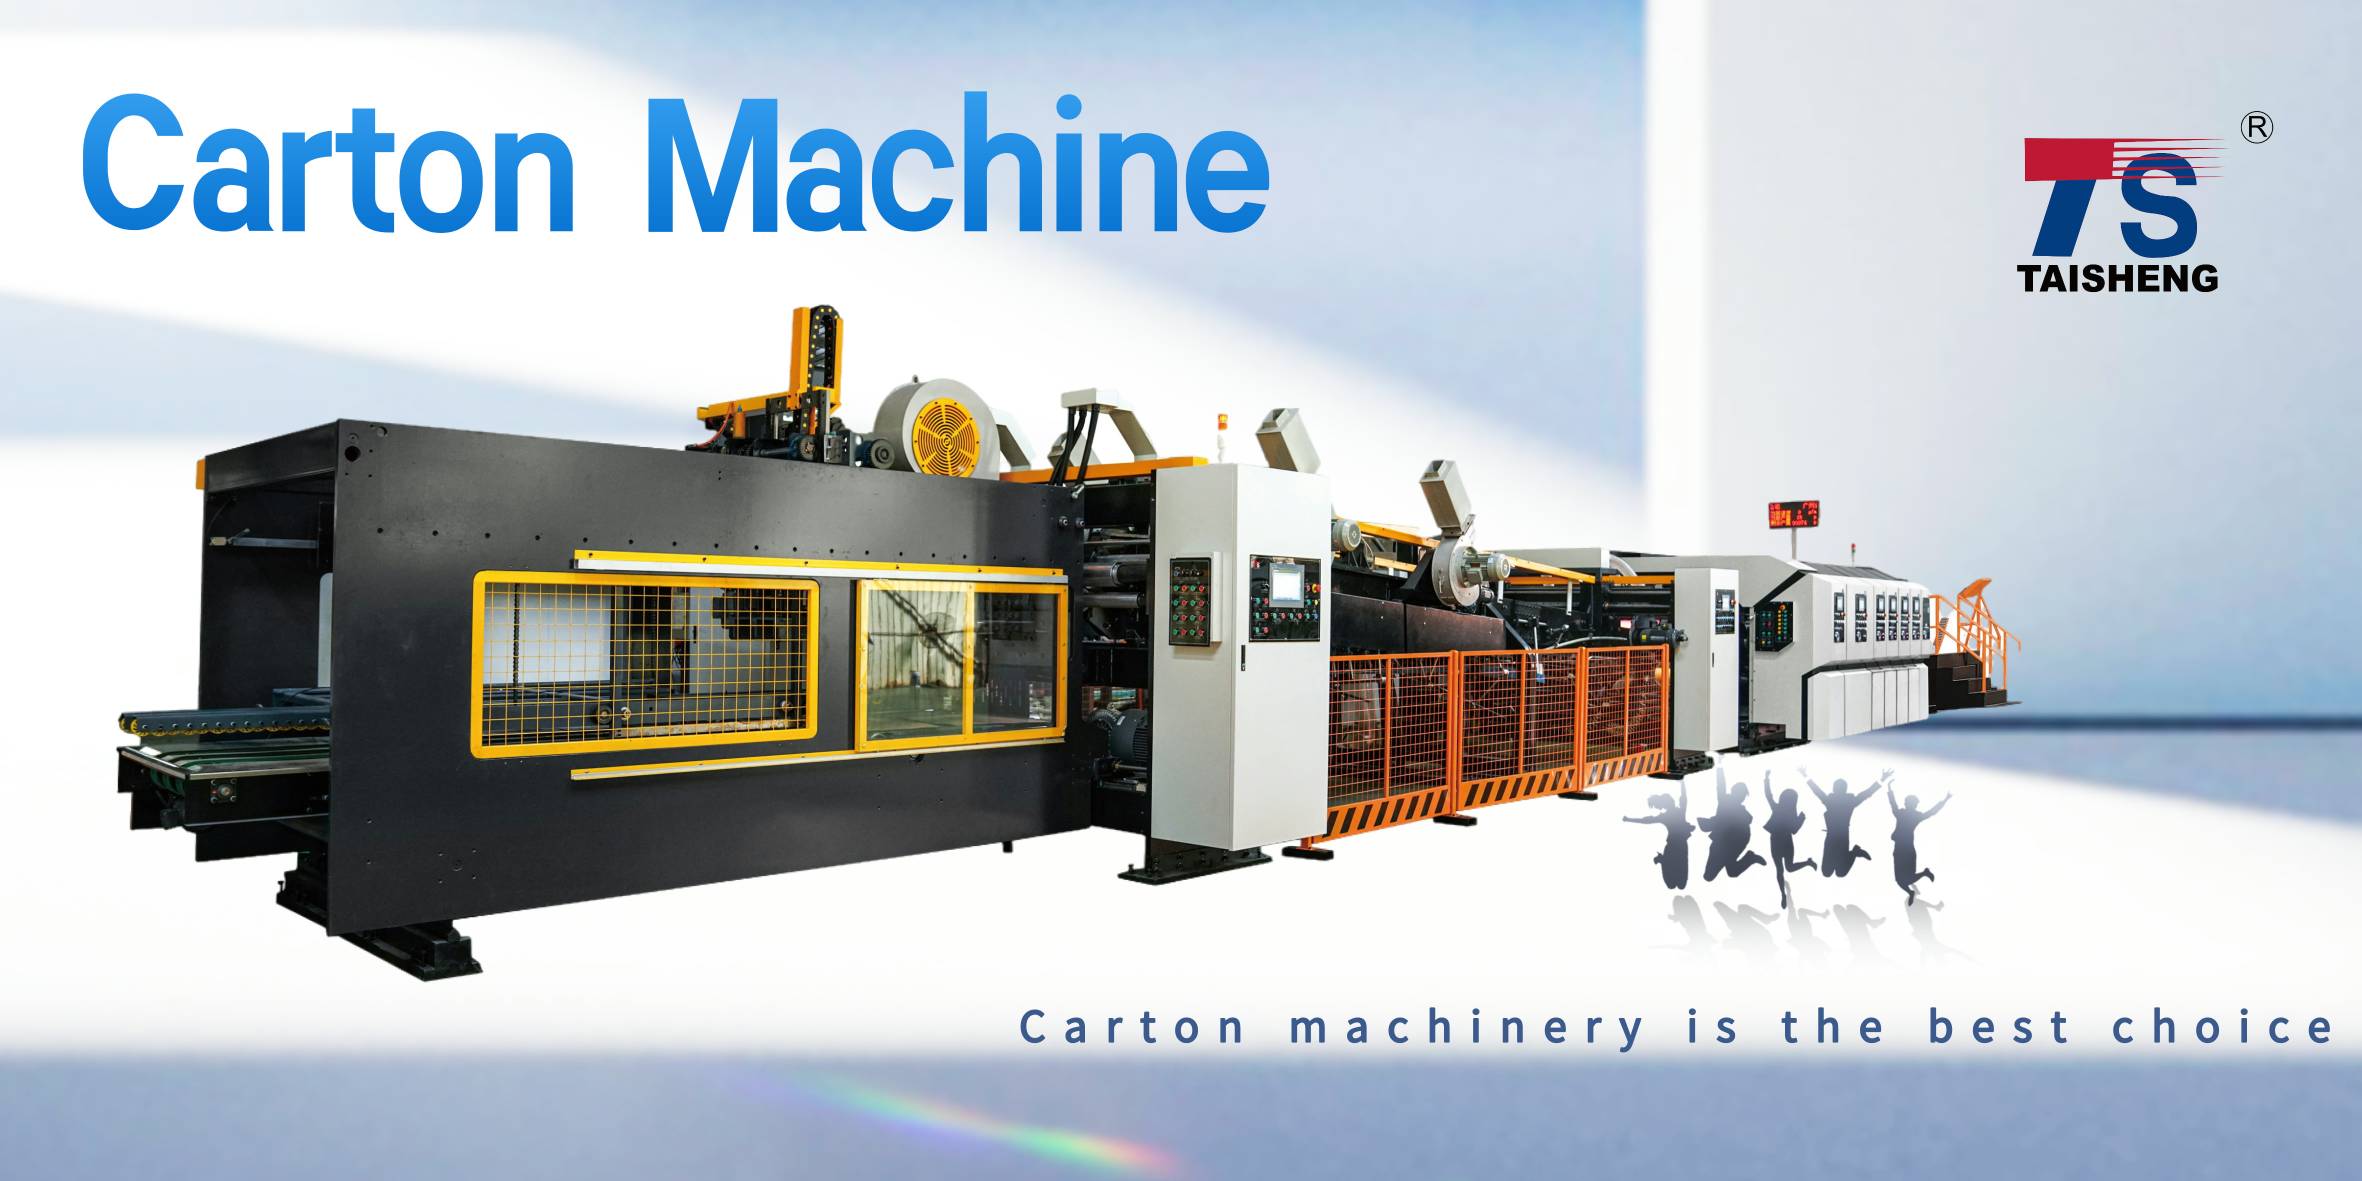 One of the most popular line corrugated box machines